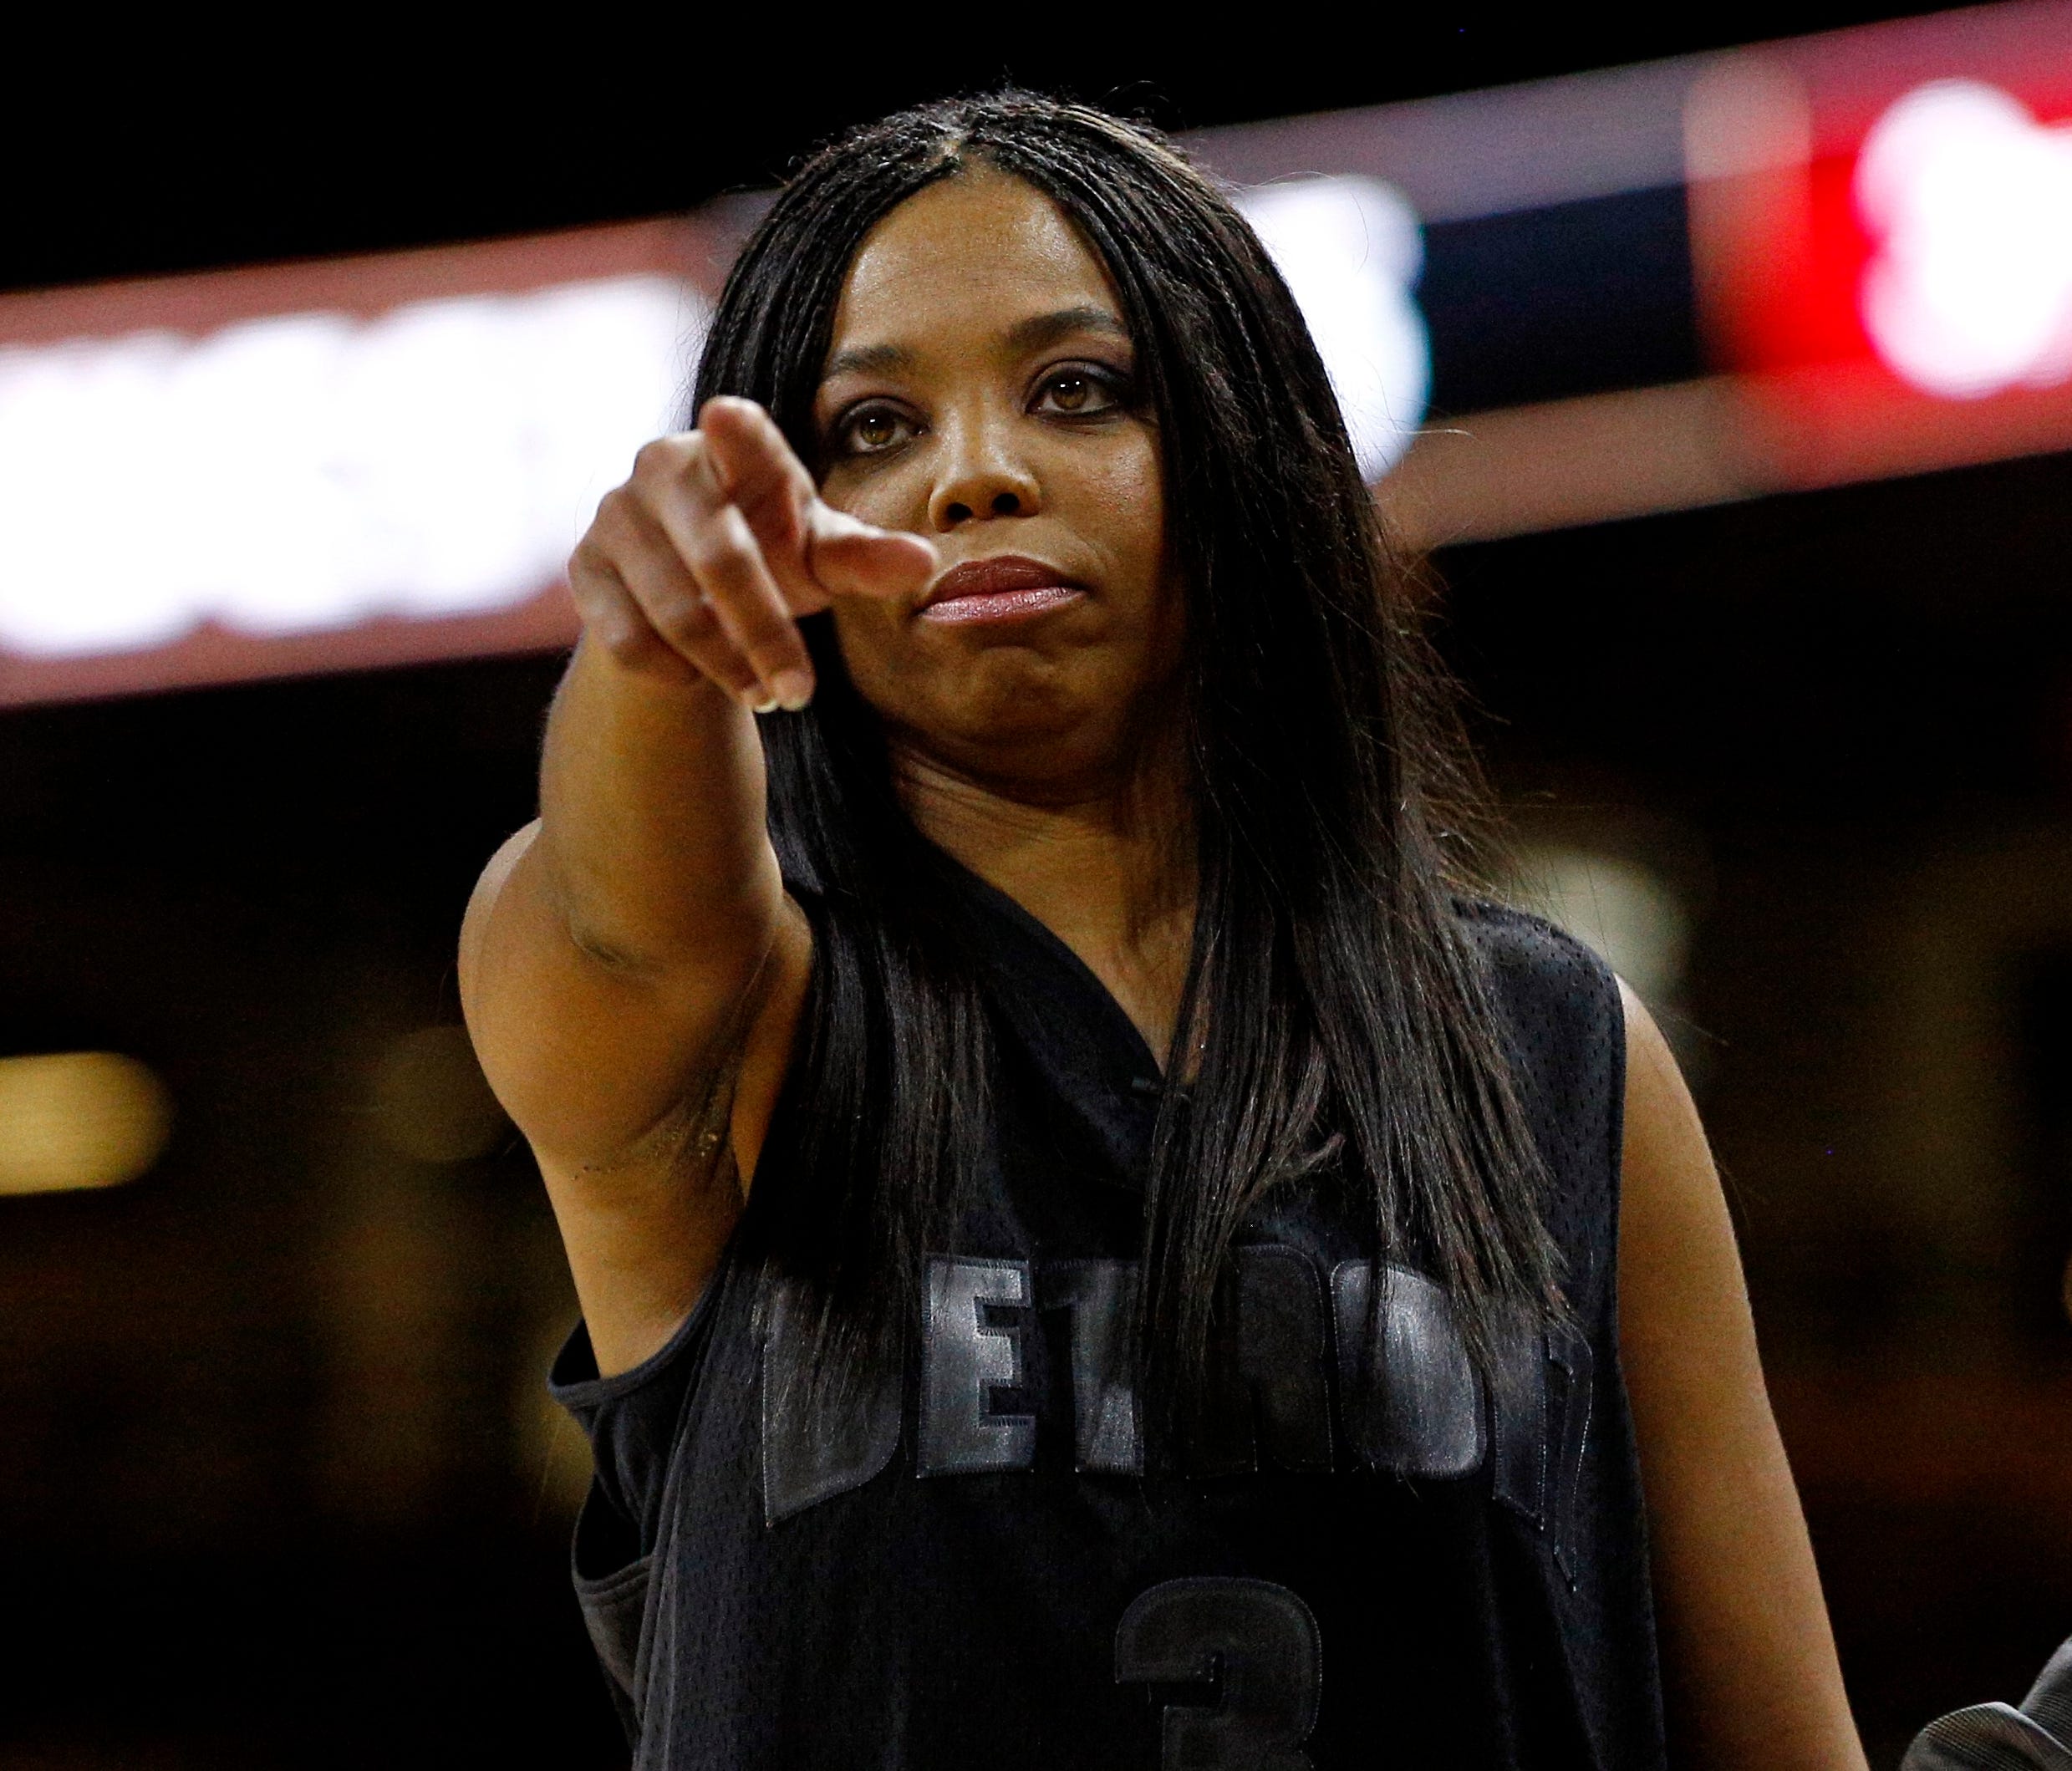 Jemele Hill apologized to ESPN for remarks about Donald Trump.